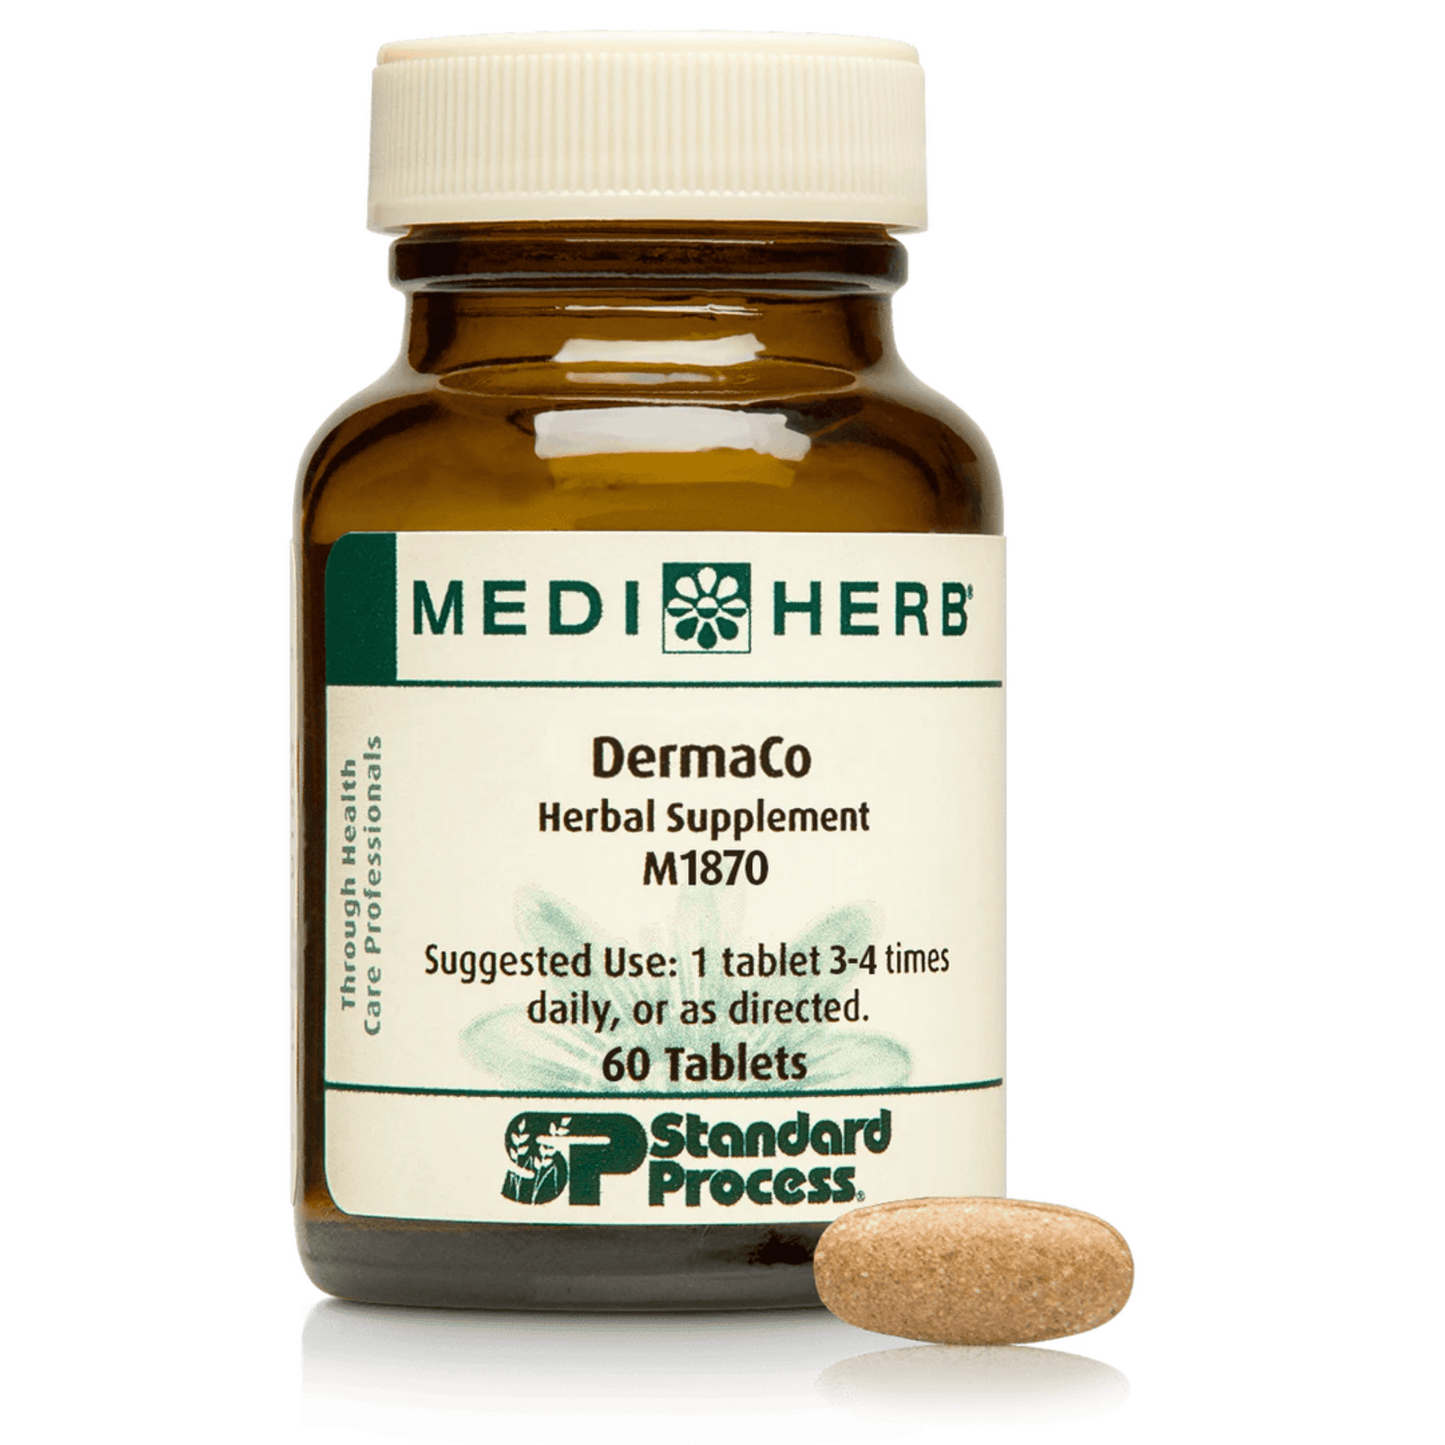 Primary Image of DermaCo (60 count)